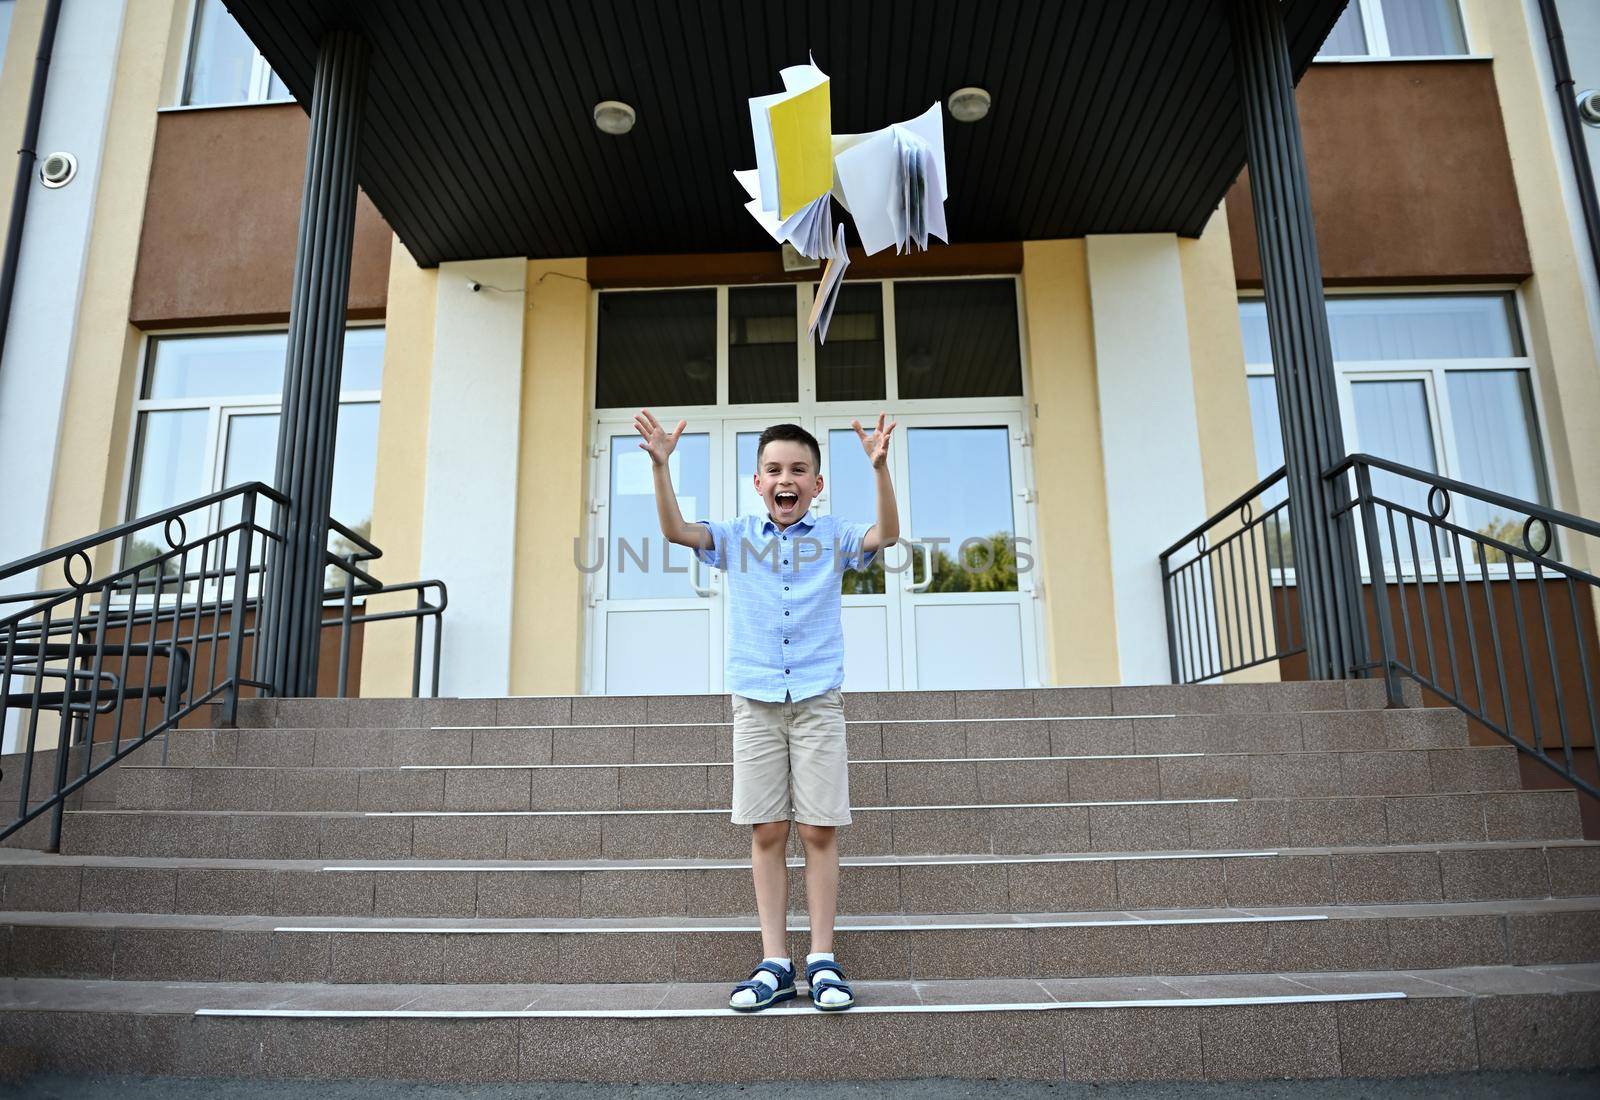 Schoolboy rejoices at the end of lessons and school, throws workbooks up, laughing and smiling happily while standing on the stairs against the background of the school institution